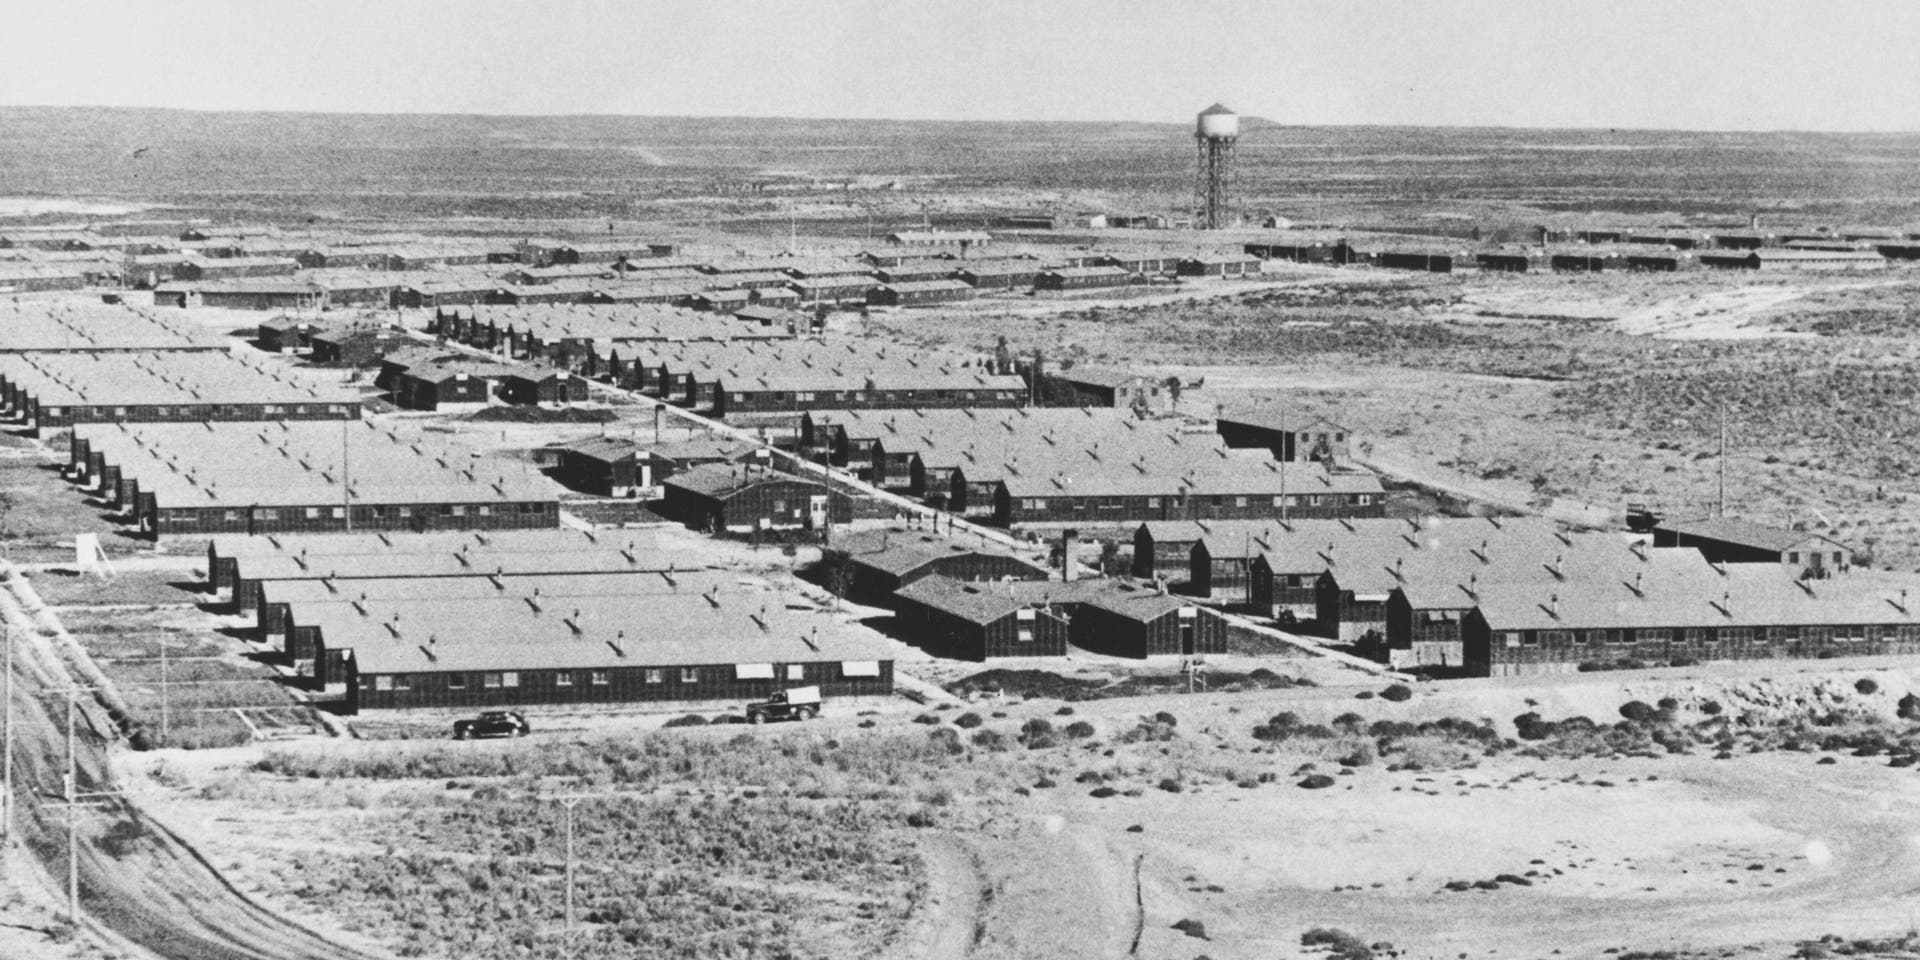 Minidoka War Relocation CenterHigh angle view of the huts of the Minidoka War Relocation Center in the Magic Valley, Jerome County, Idaho, 4th November 1942. Approximately 9,000 Japanese Americans were detained at Minidoka, one of ten American internment camps during World War II. (Photo by UPI/Bettmann Archive/Getty Images)s)